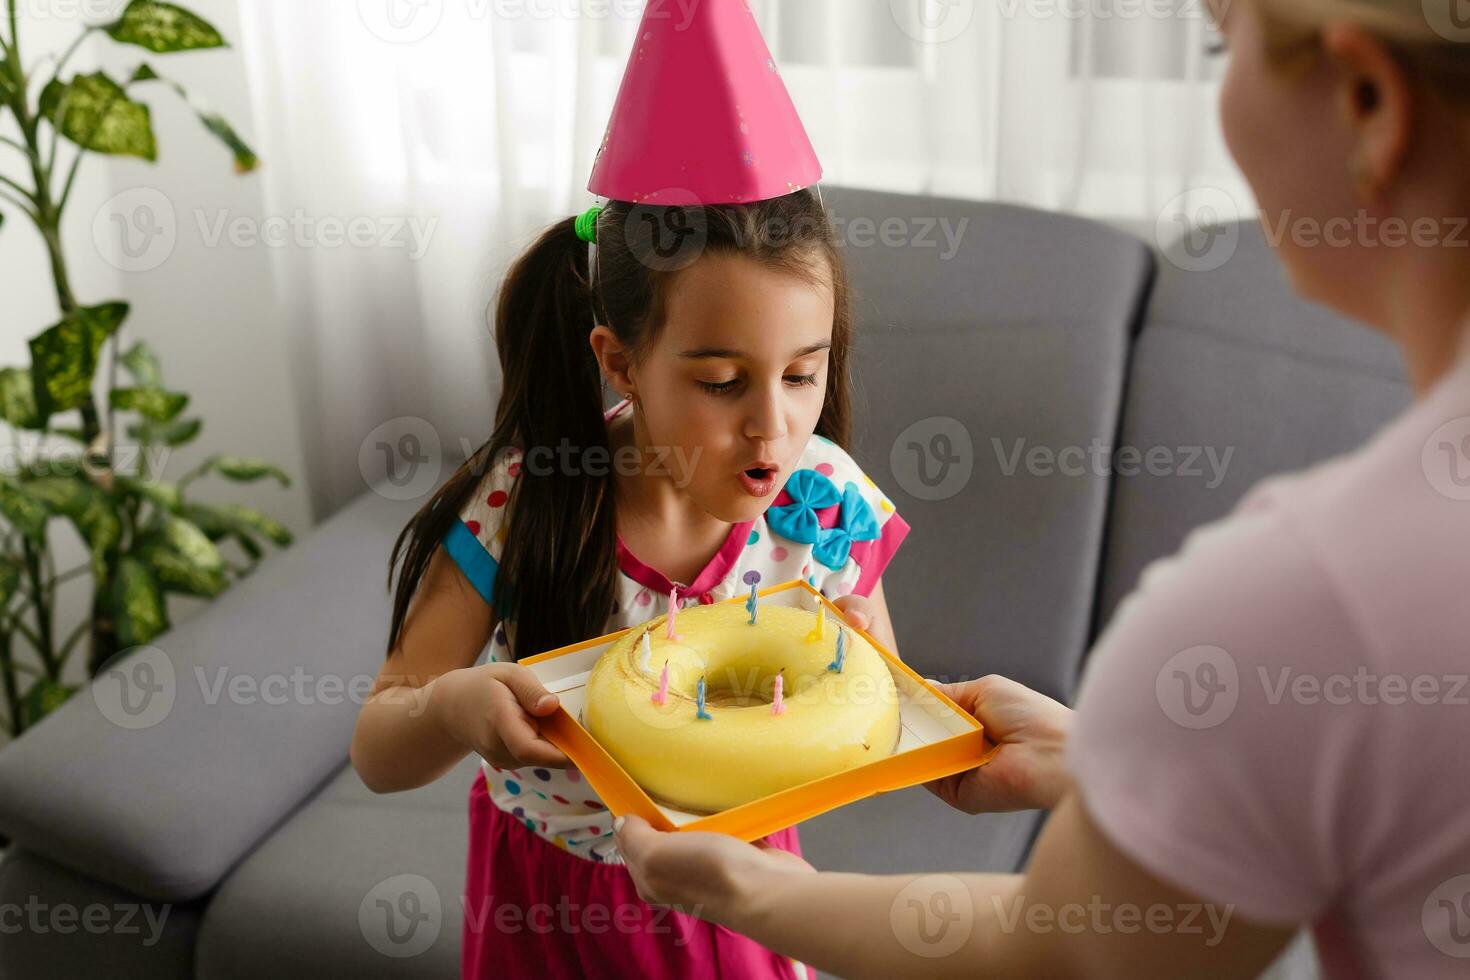 Happy girl sibling celebrating birthday via internet in quarantine time, self-isolation and family values, online birthday party. Congratulations animator via laptop, online. Stay at home photo